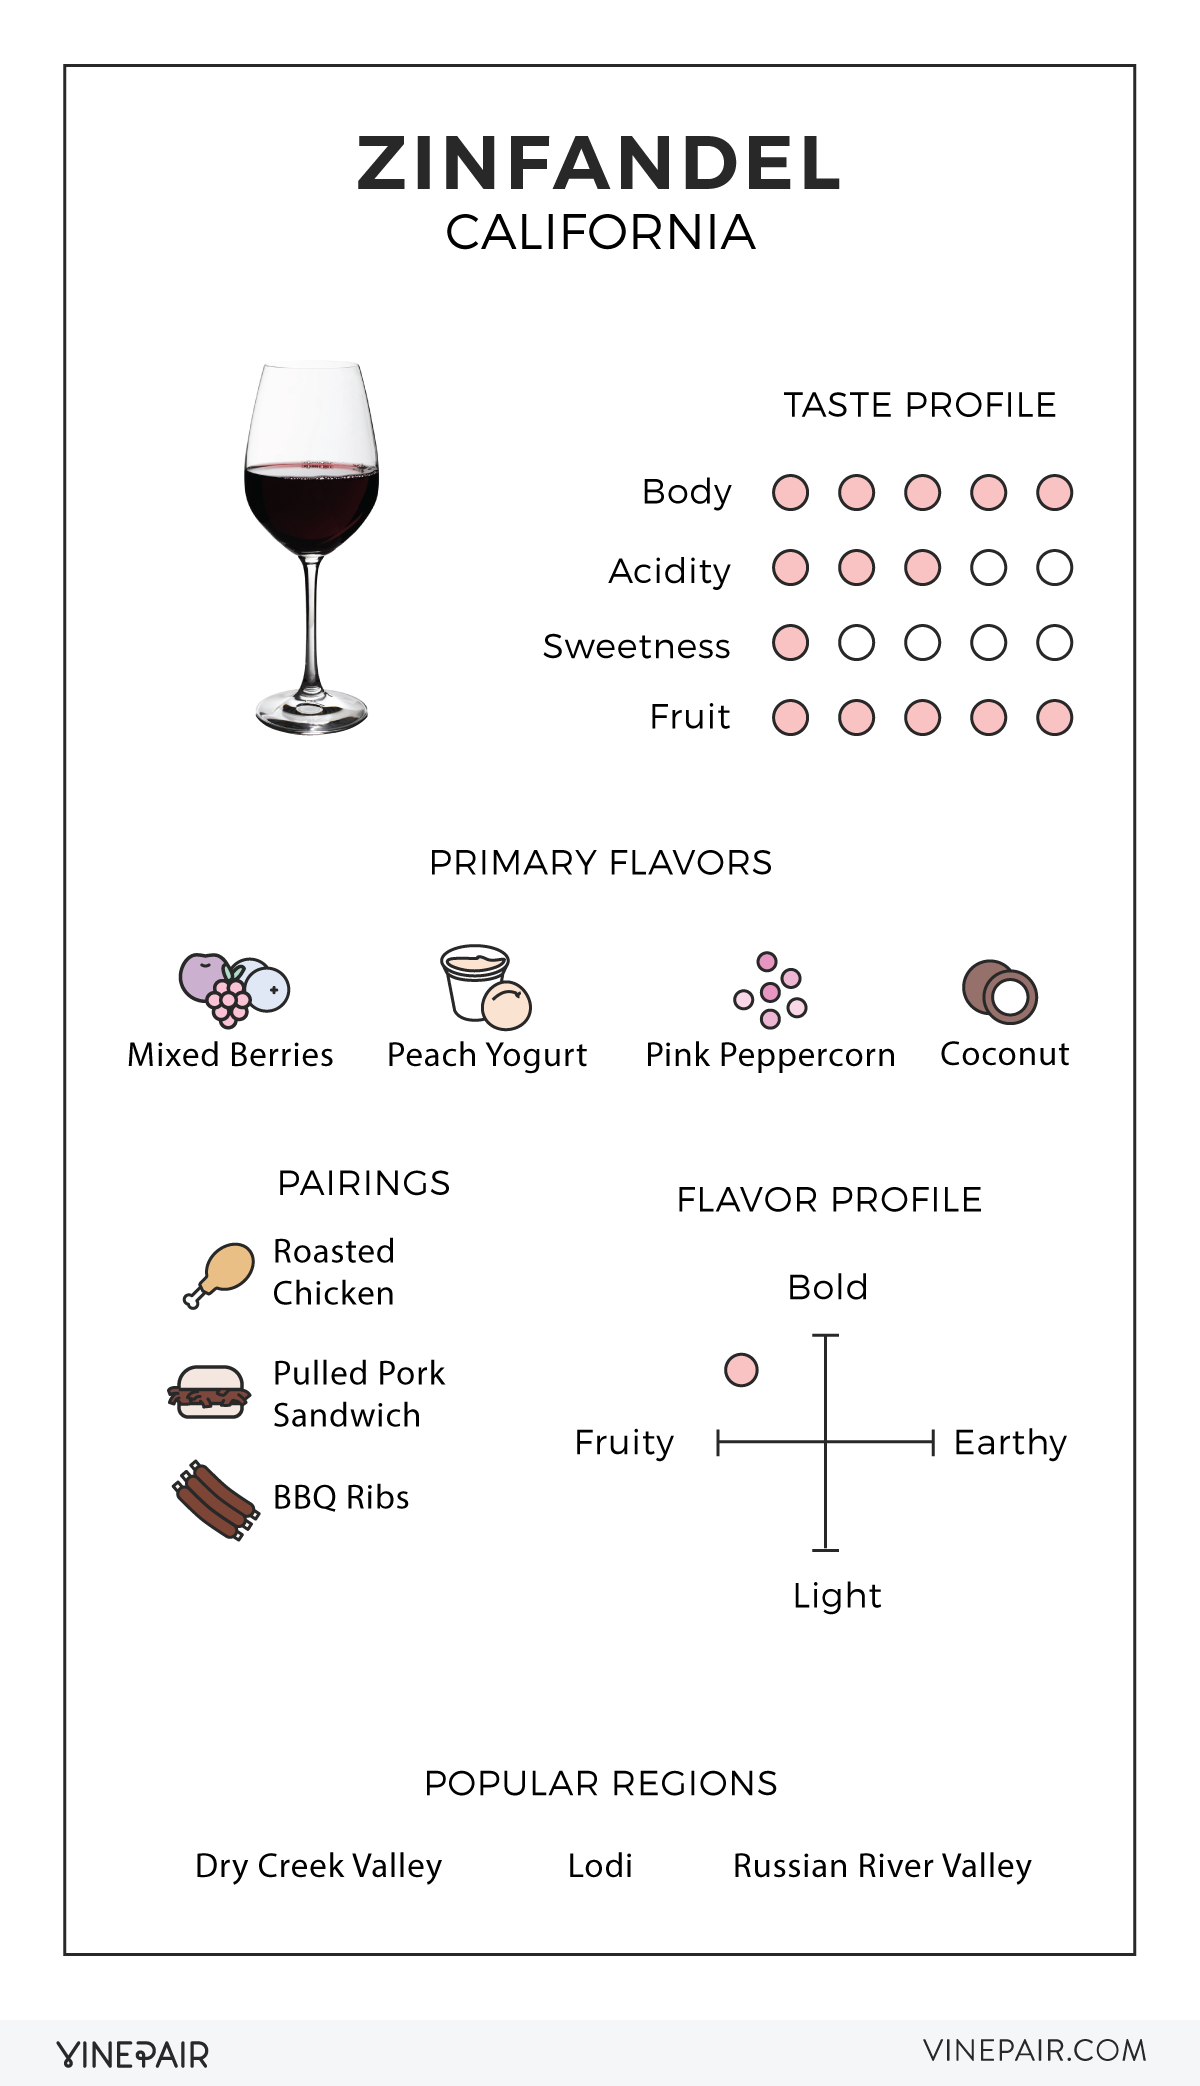 An Illustrated Guide to California Zinfandel VinePair